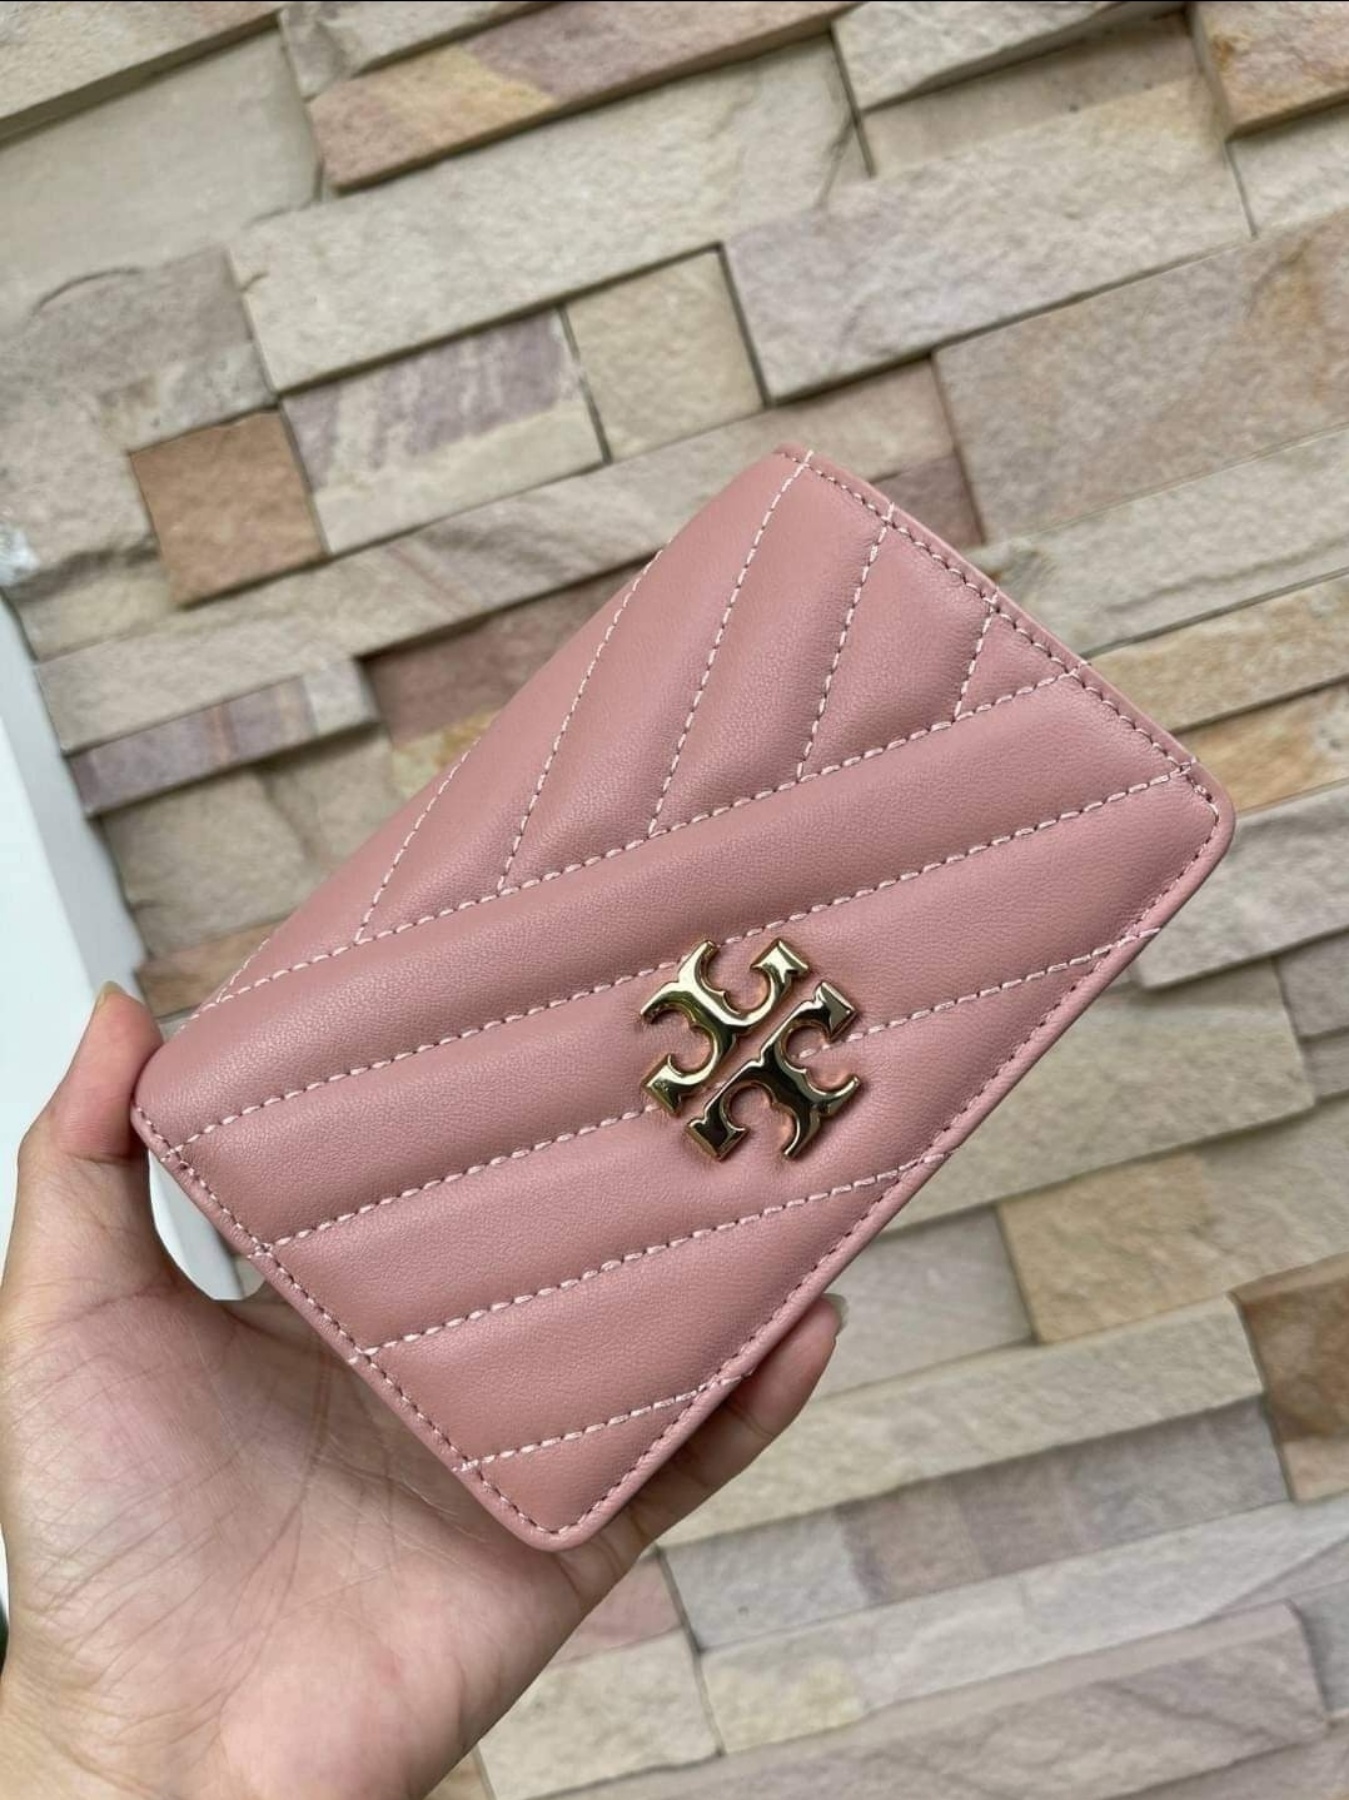 T.O.R.Y B.U.R.C.H 56607 Kira Chevron Medium Slim Wallet in Pink Moon Soft  Quilted Leather with Pin-snap Closure - Women's Bi-Fold Wallet